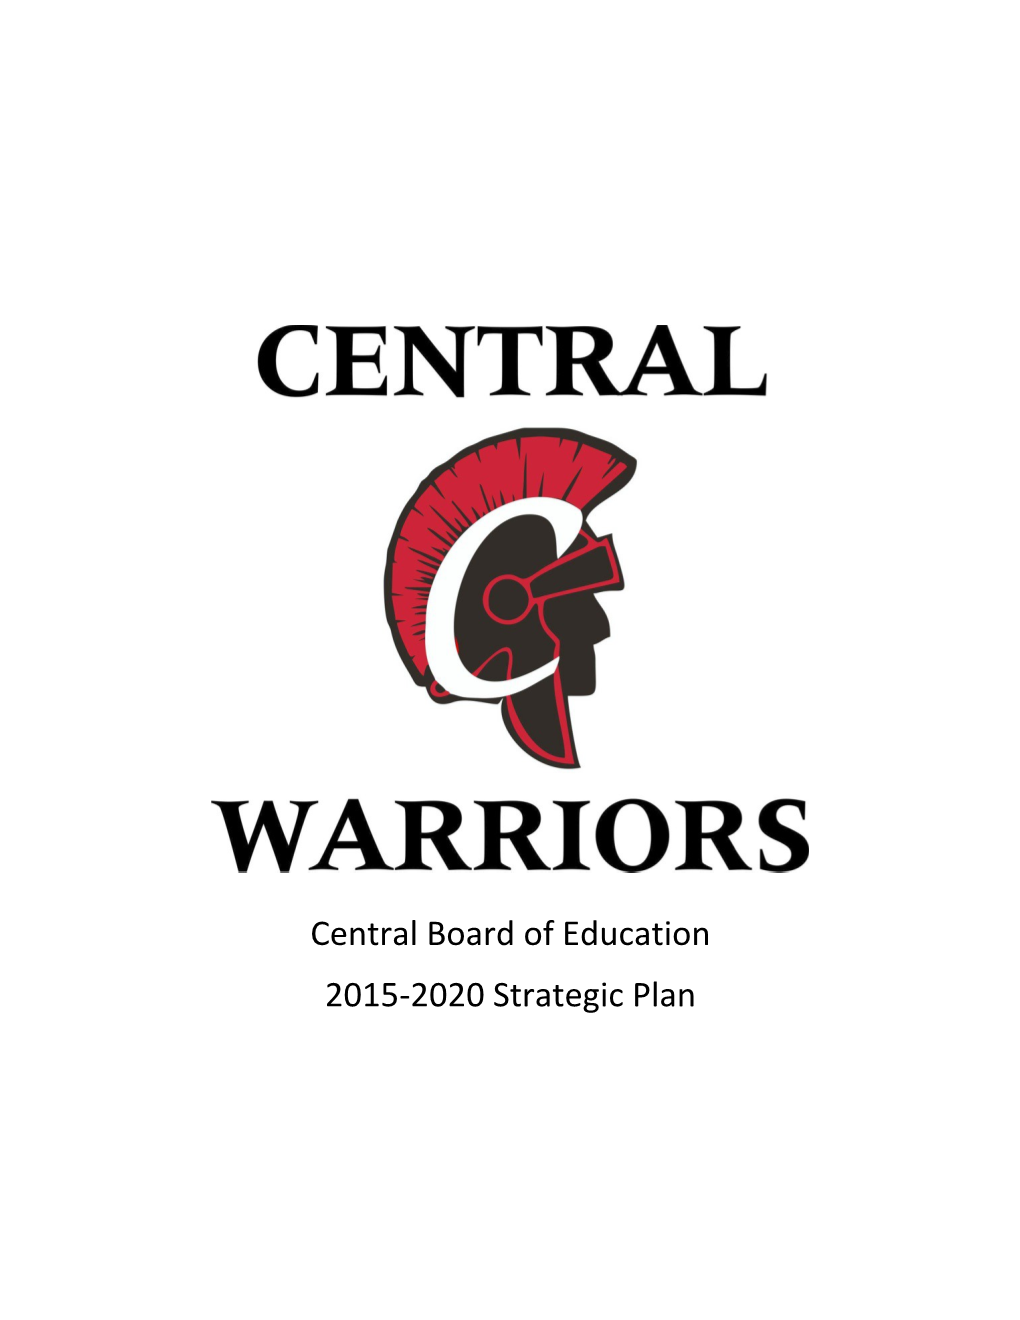 Central Board of Education